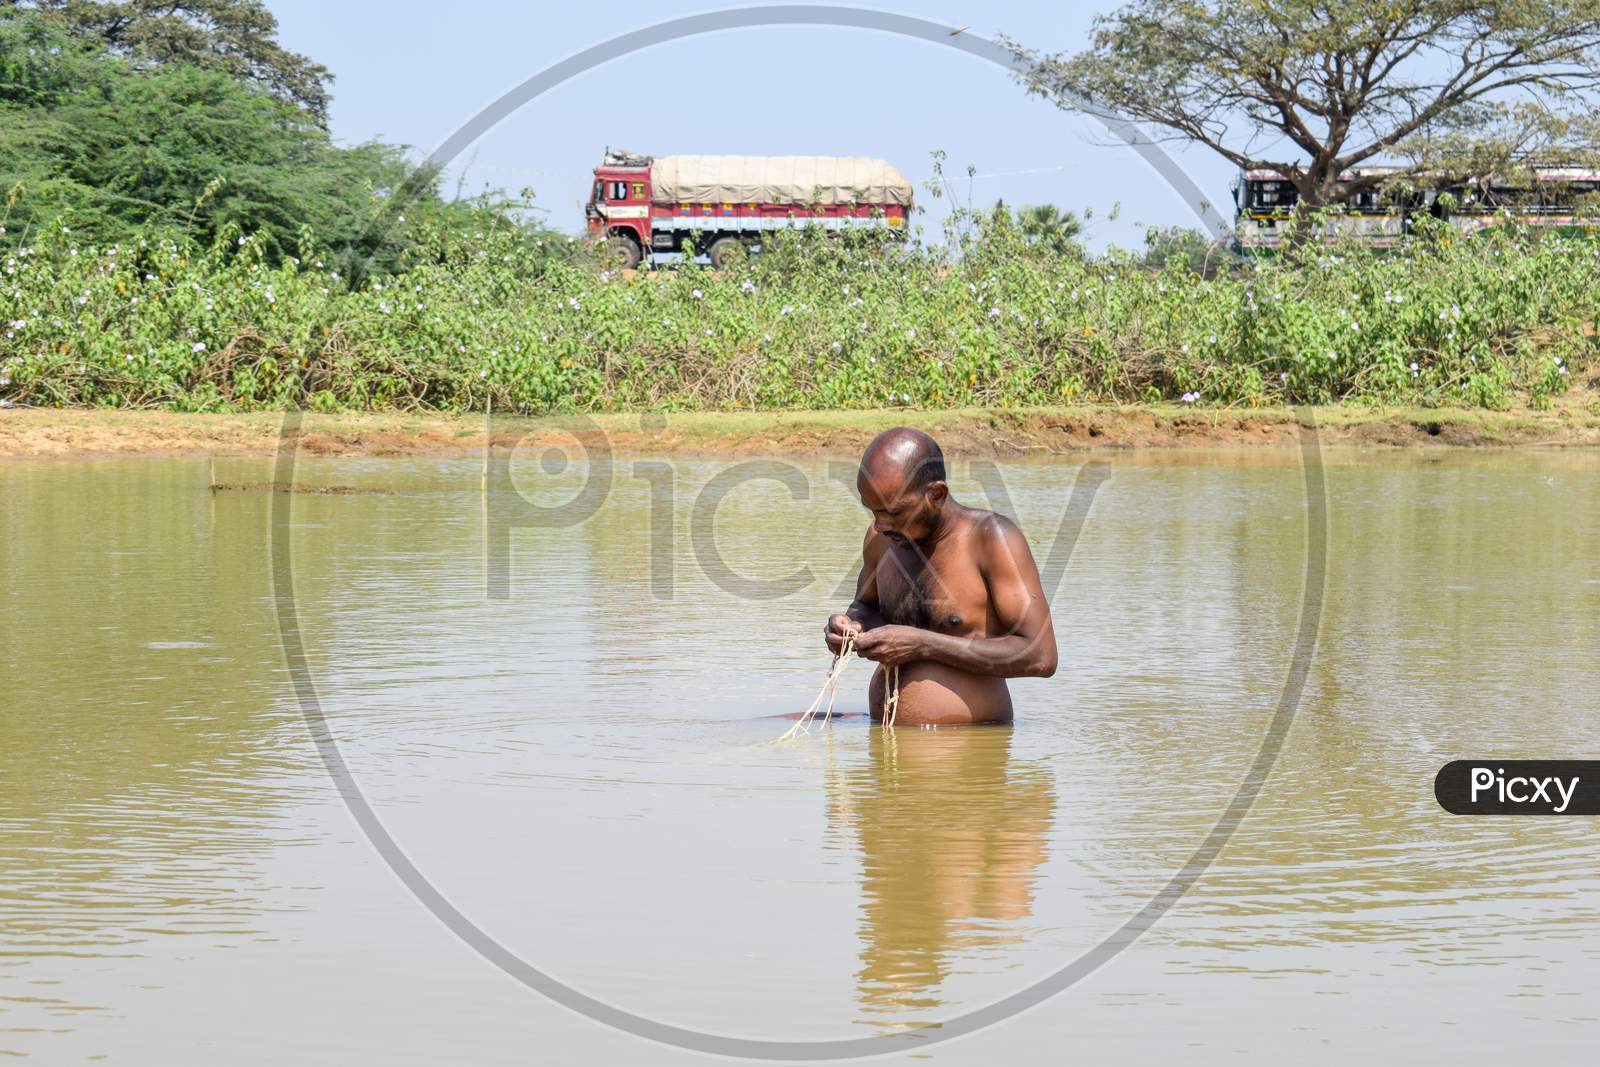 Fishing in the rural area